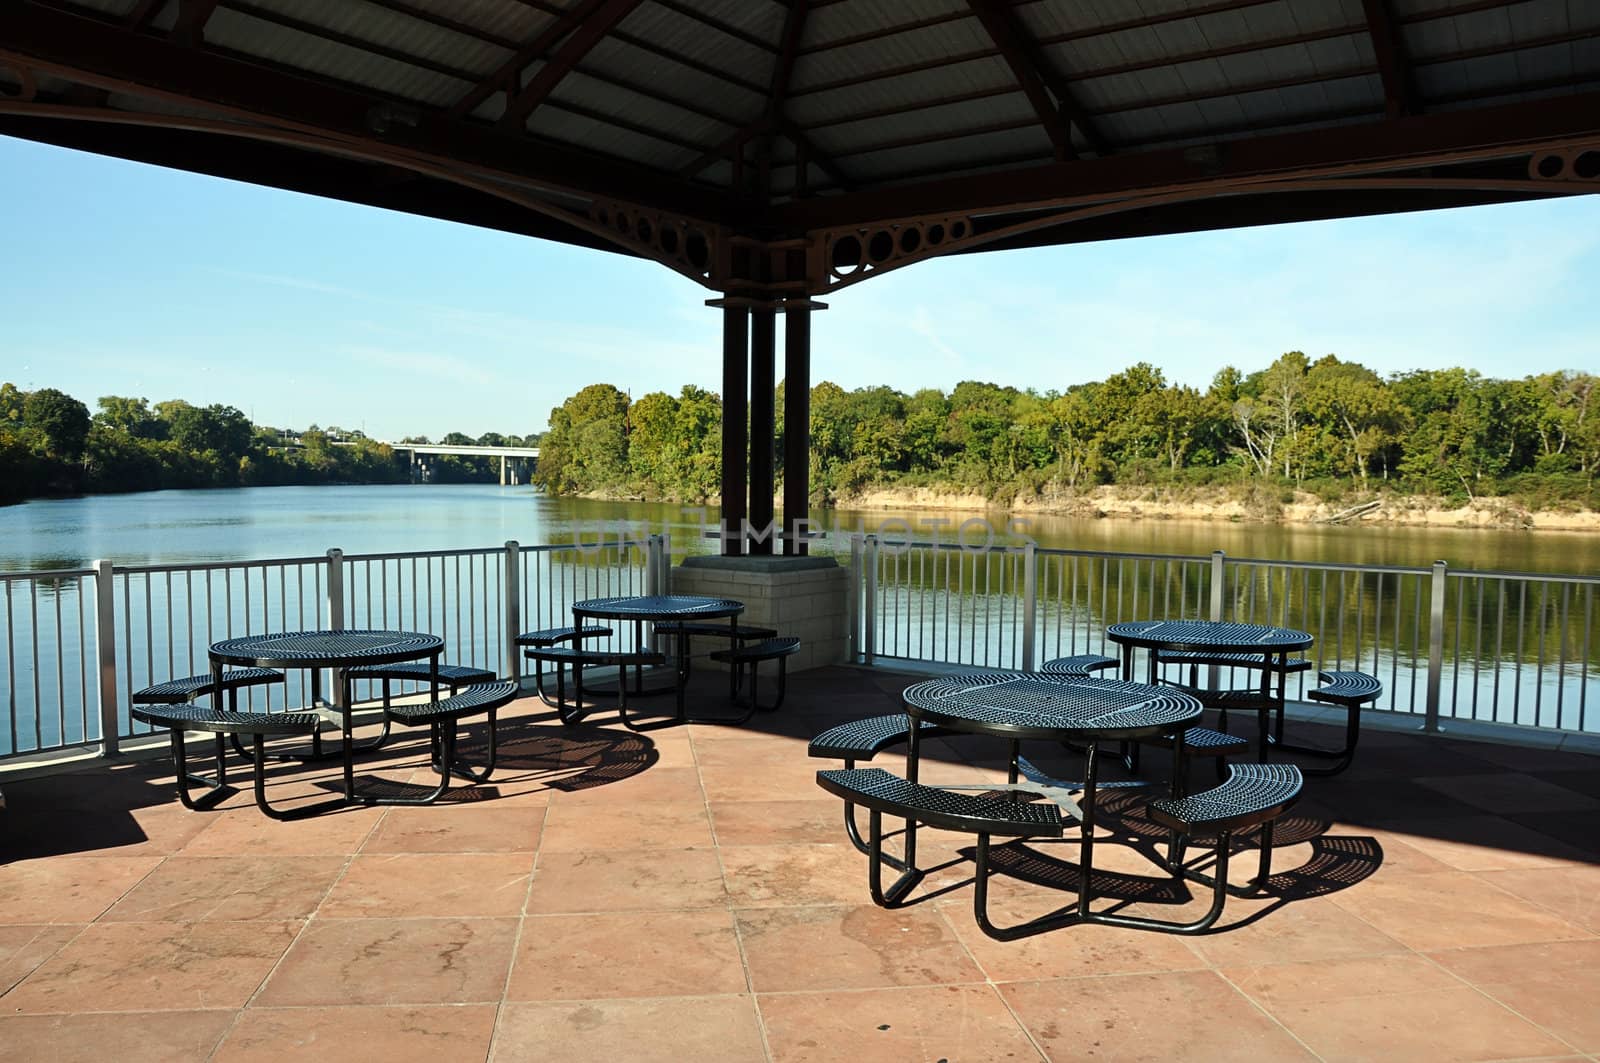 Picnic Tables on Pavilion Overlooking River